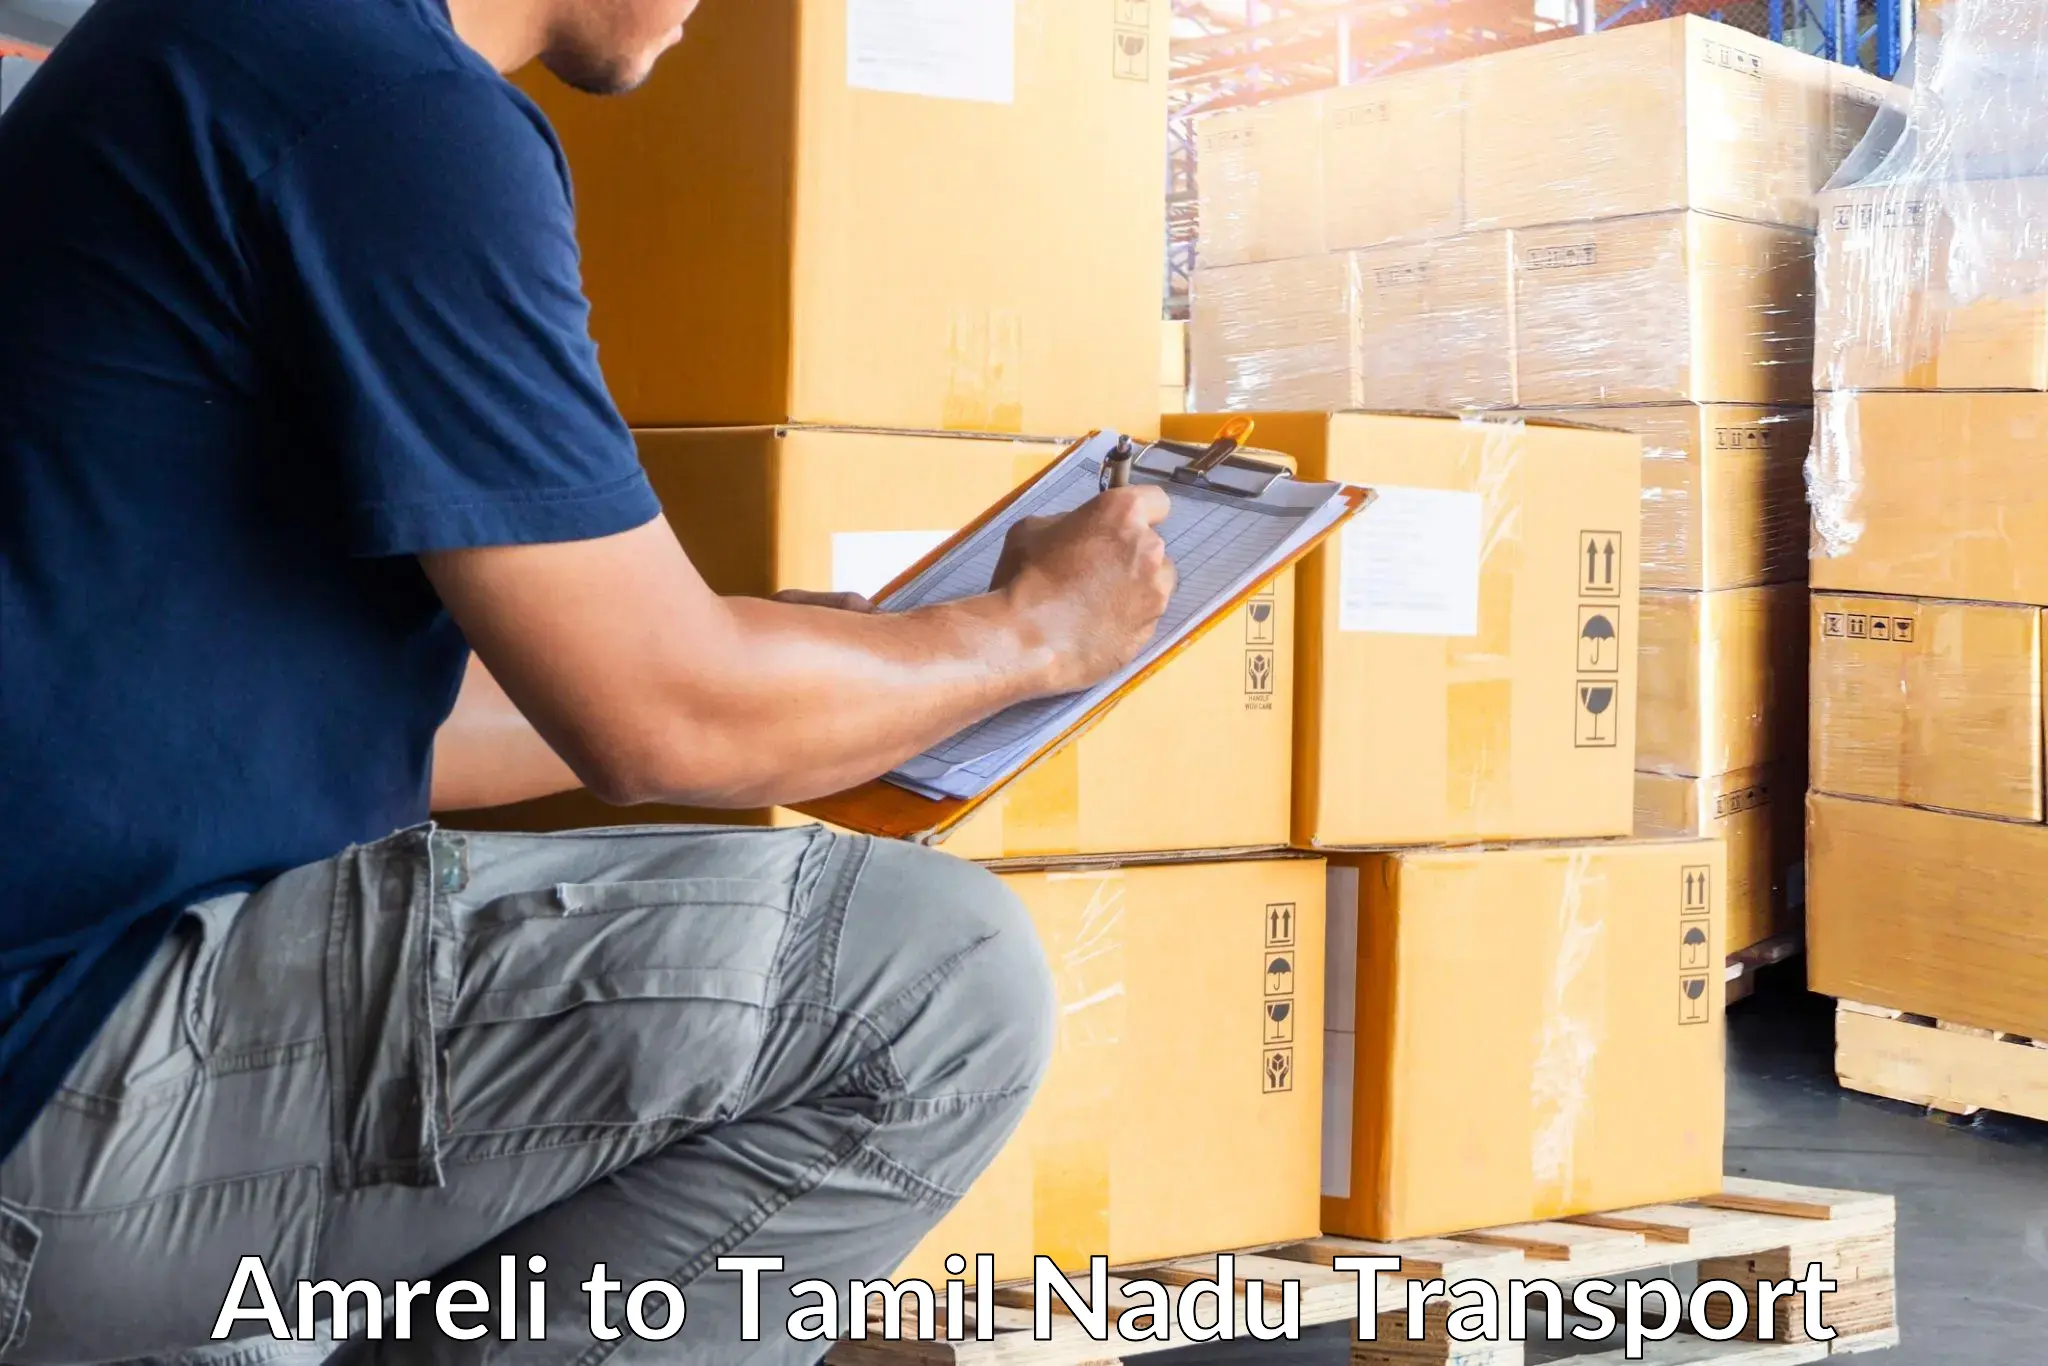 Air freight transport services Amreli to Tamil Nadu